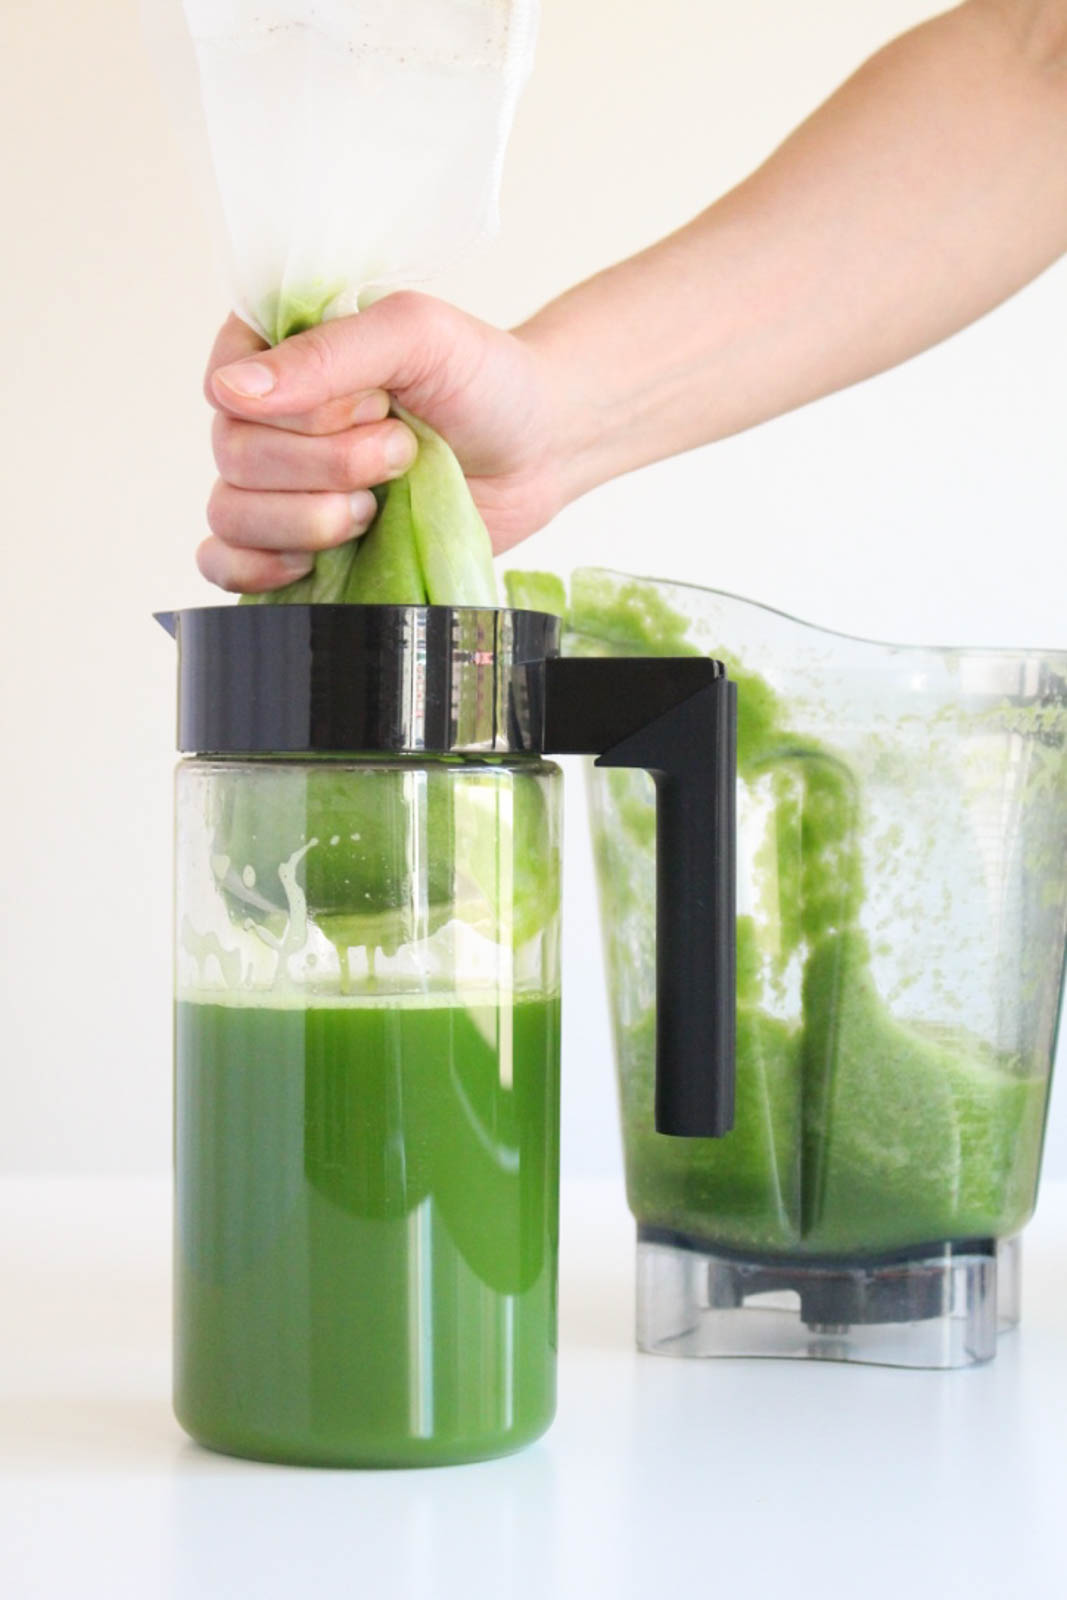 what-can-you-use-instead-of-a-juicer